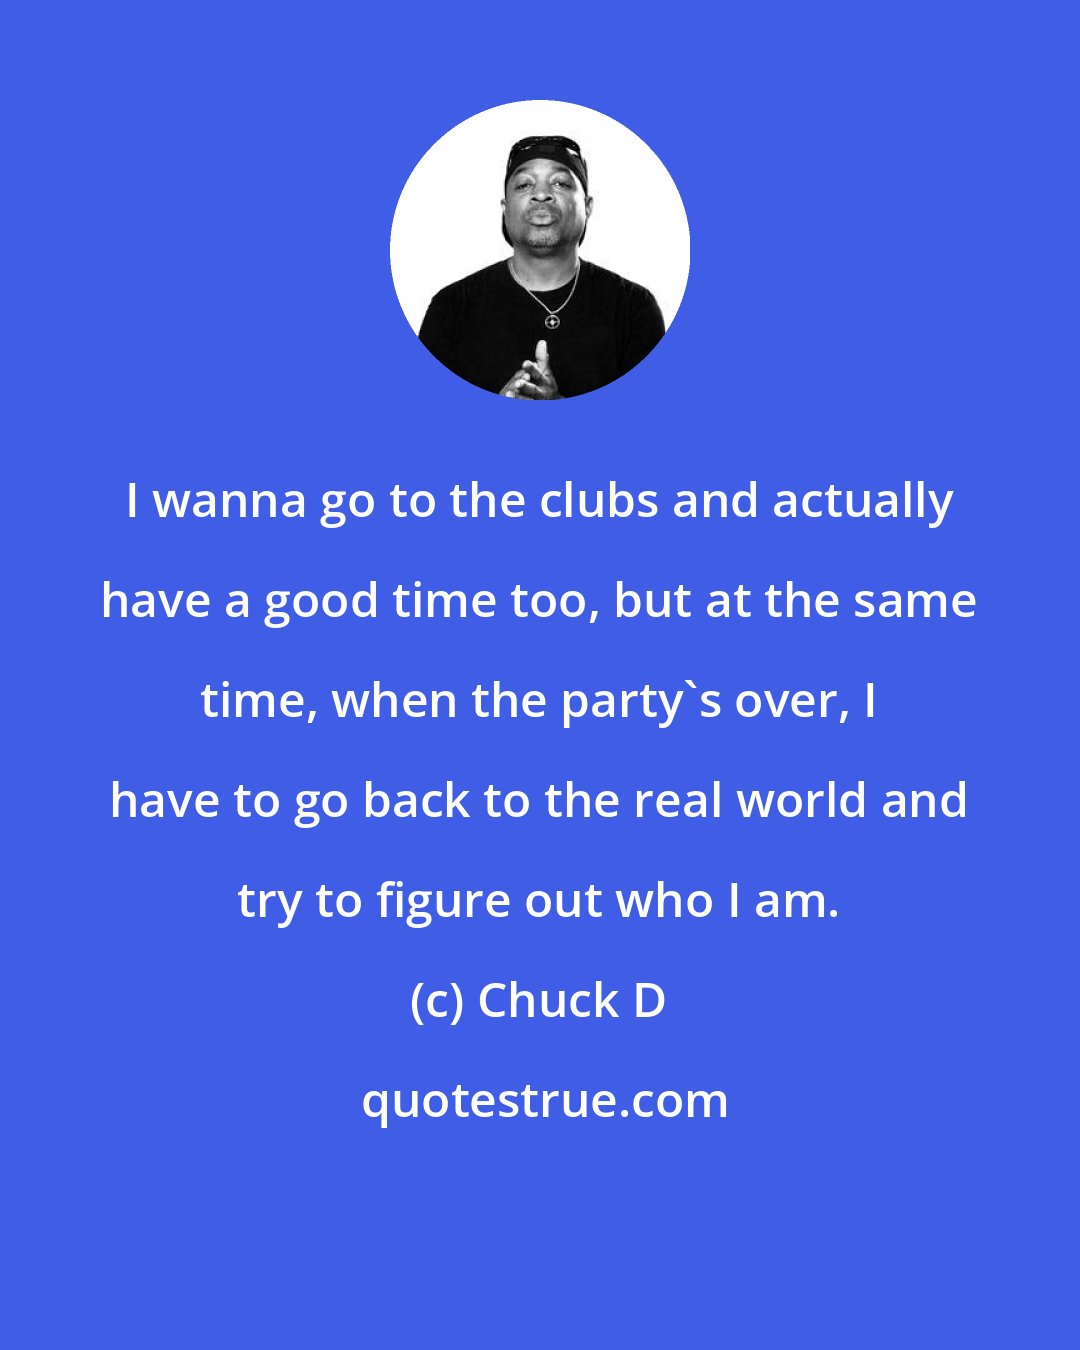 Chuck D: I wanna go to the clubs and actually have a good time too, but at the same time, when the party's over, I have to go back to the real world and try to figure out who I am.